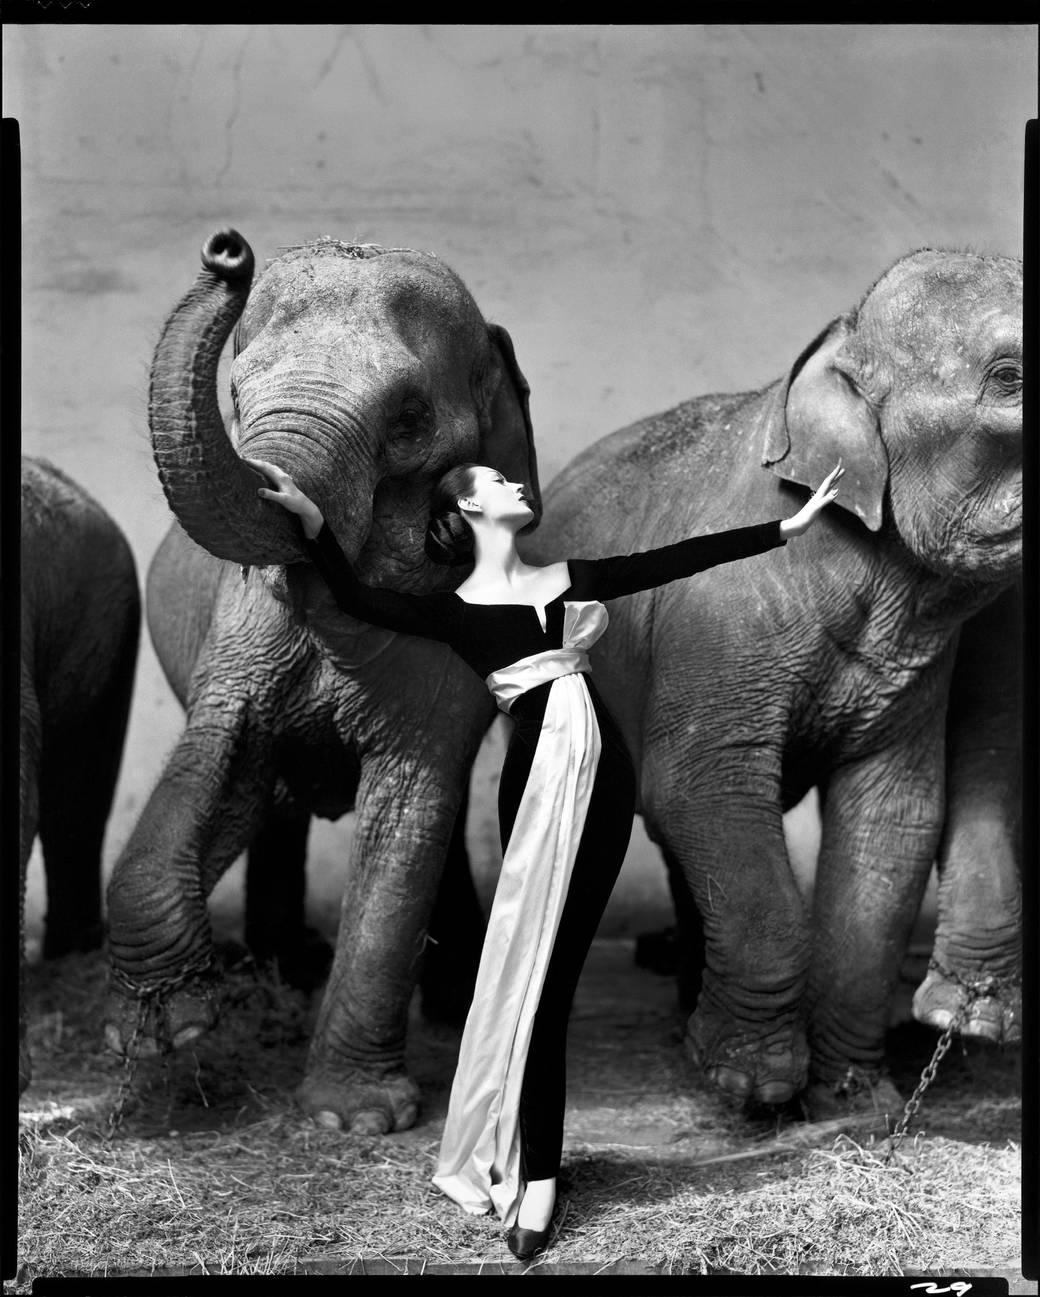 Richard Avedon, Dovima with Elephants, Evening Dress by Dior, Cirque d’Hiver, Paris, August 1955 Image courtesy of: J. Paul Getty Museum, Los Angeles